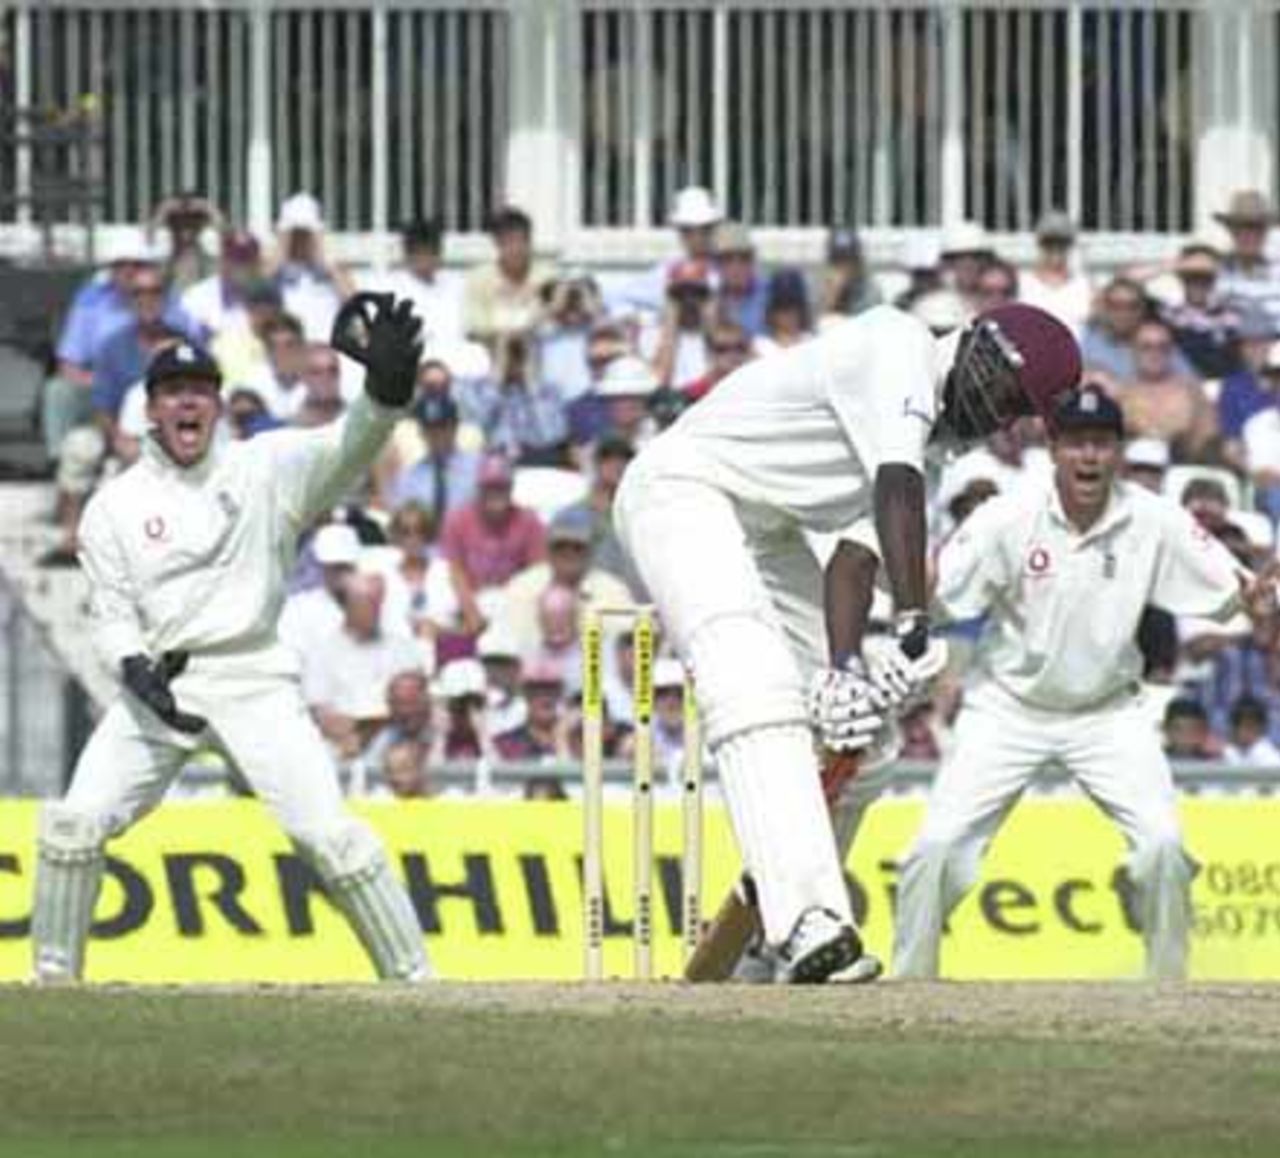 5th Day of the Cornhill Insurance Test Match at the Oval 2000